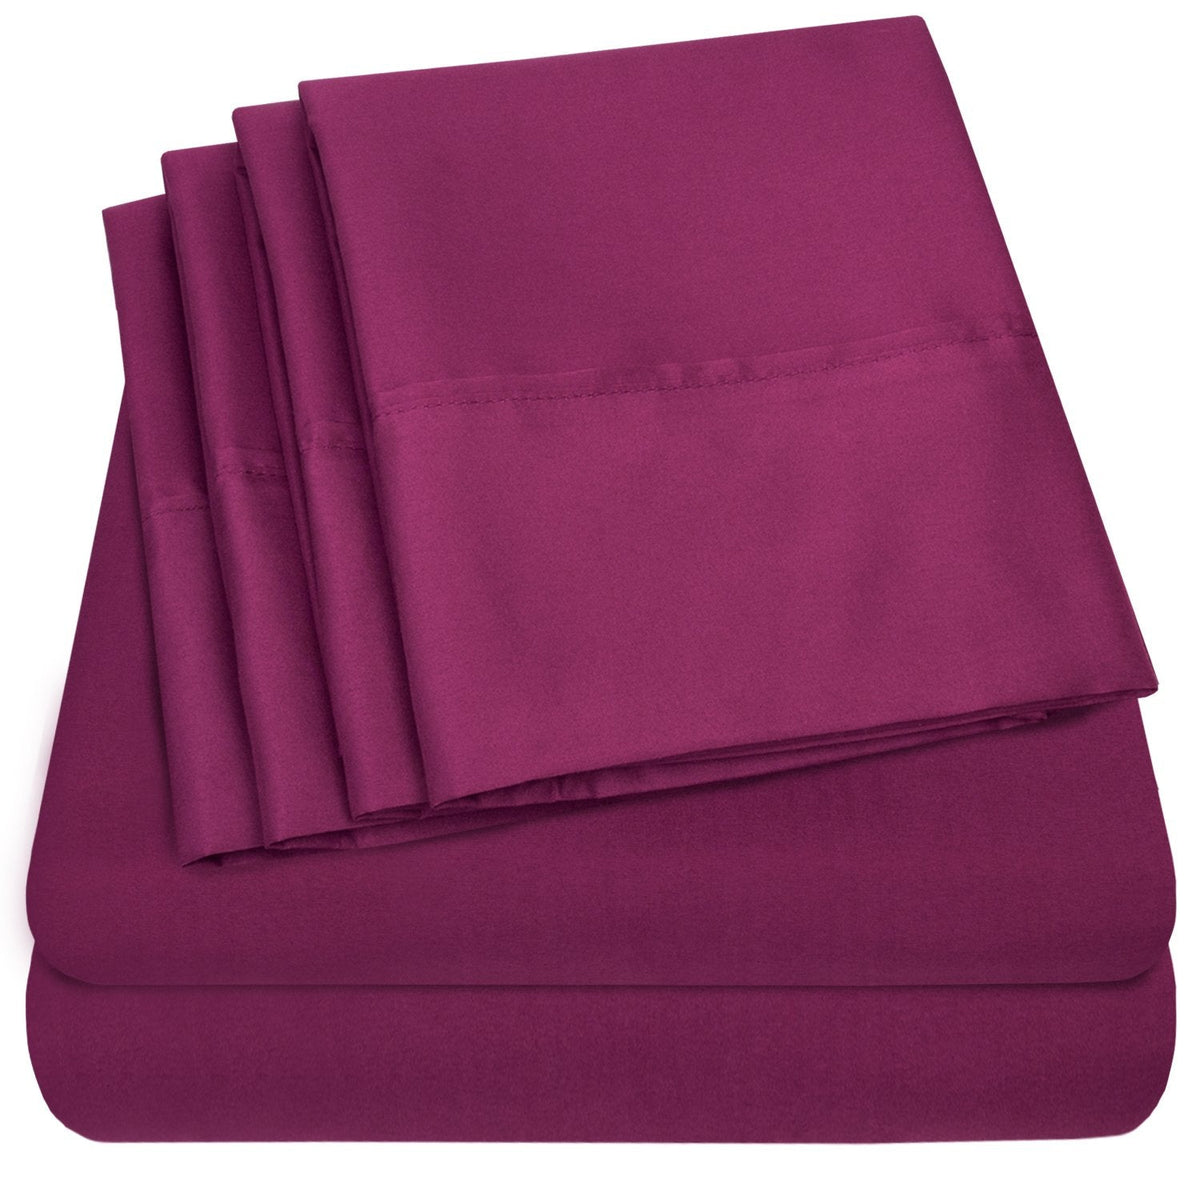 Deluxe 6-Piece Bed Sheet Set (Berry) - Folded